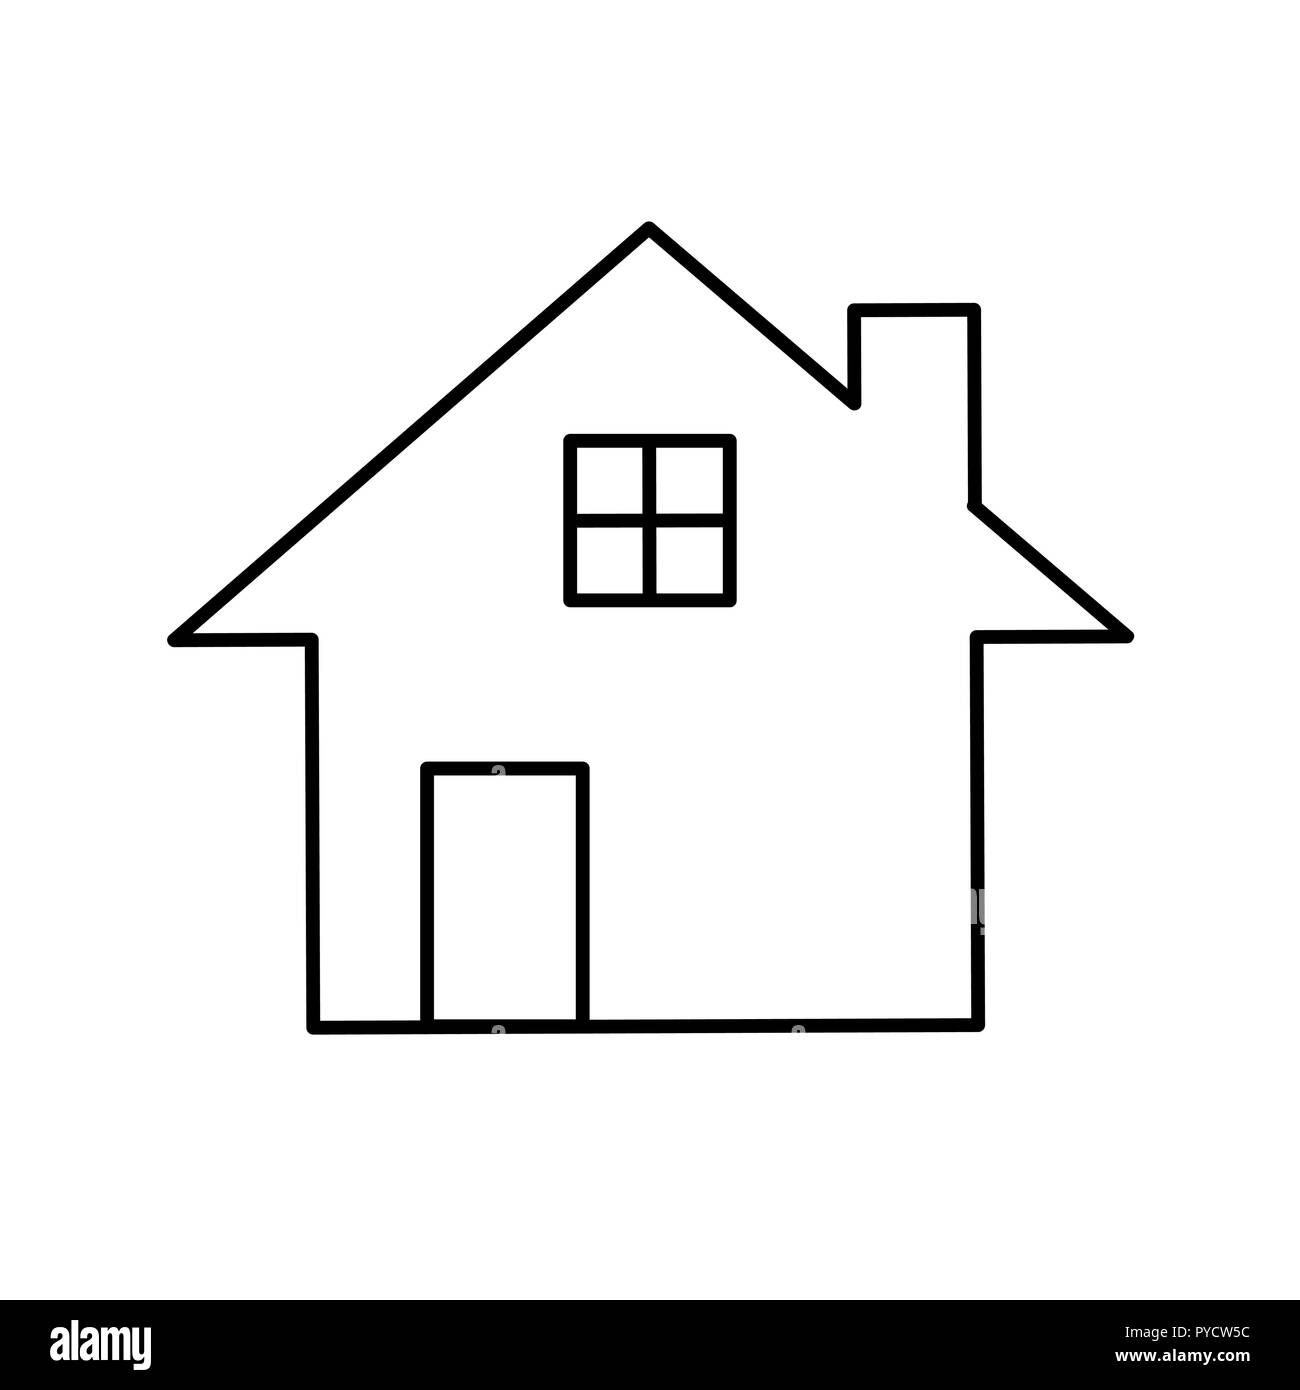 house home simple icon pictogram outline vector illustration Stock Vector